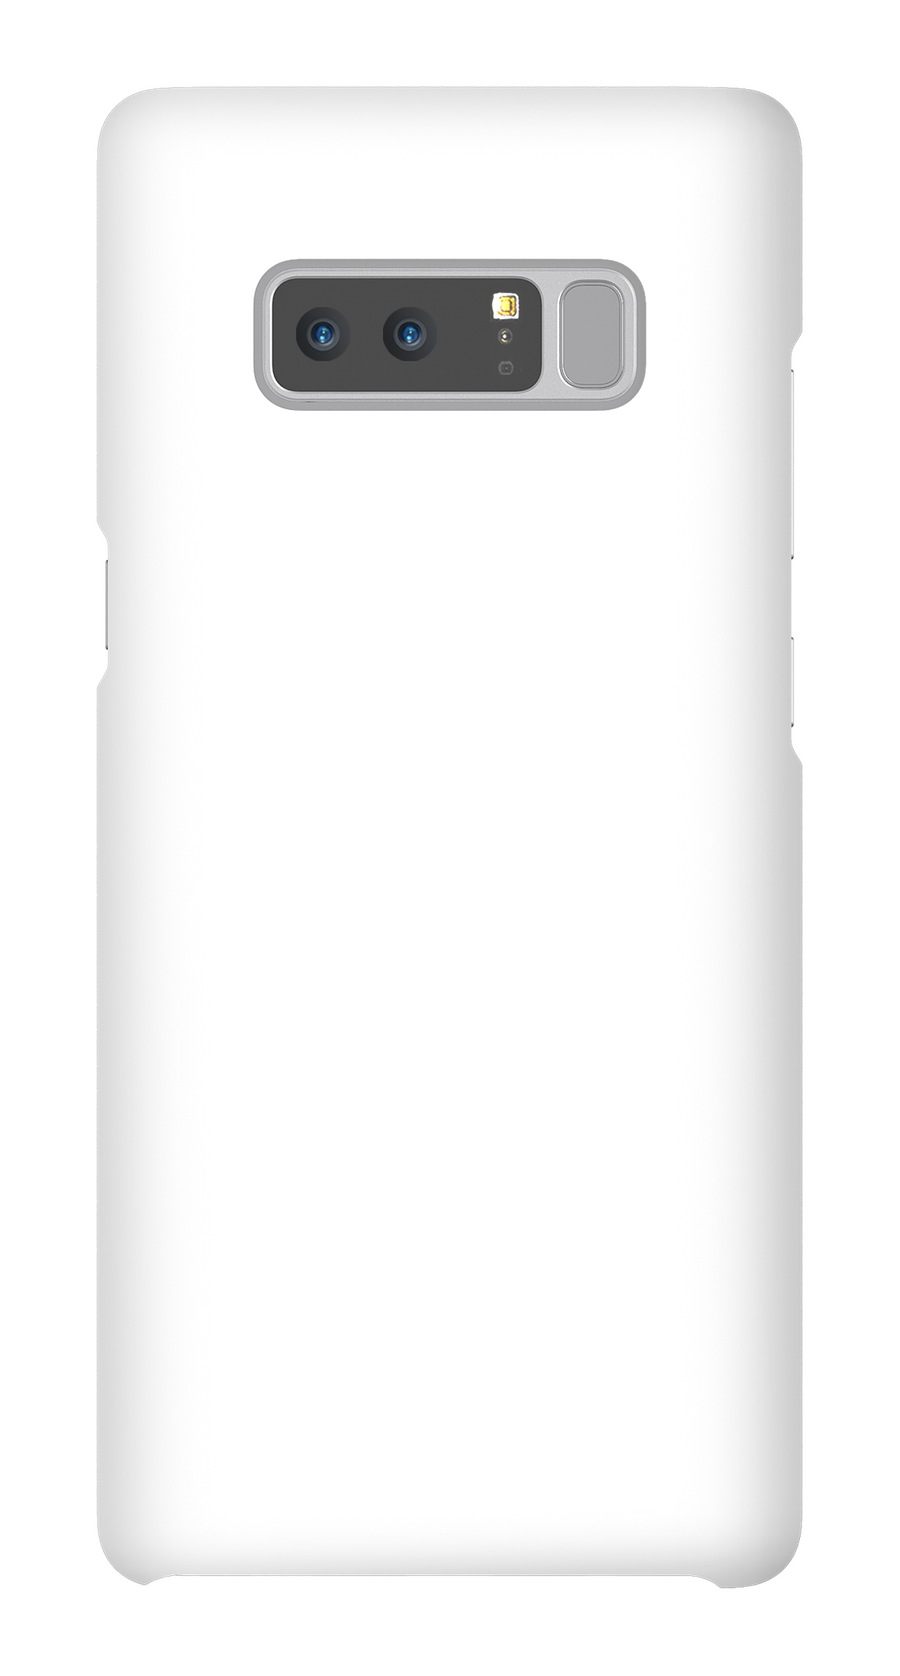 Note 8 Cases